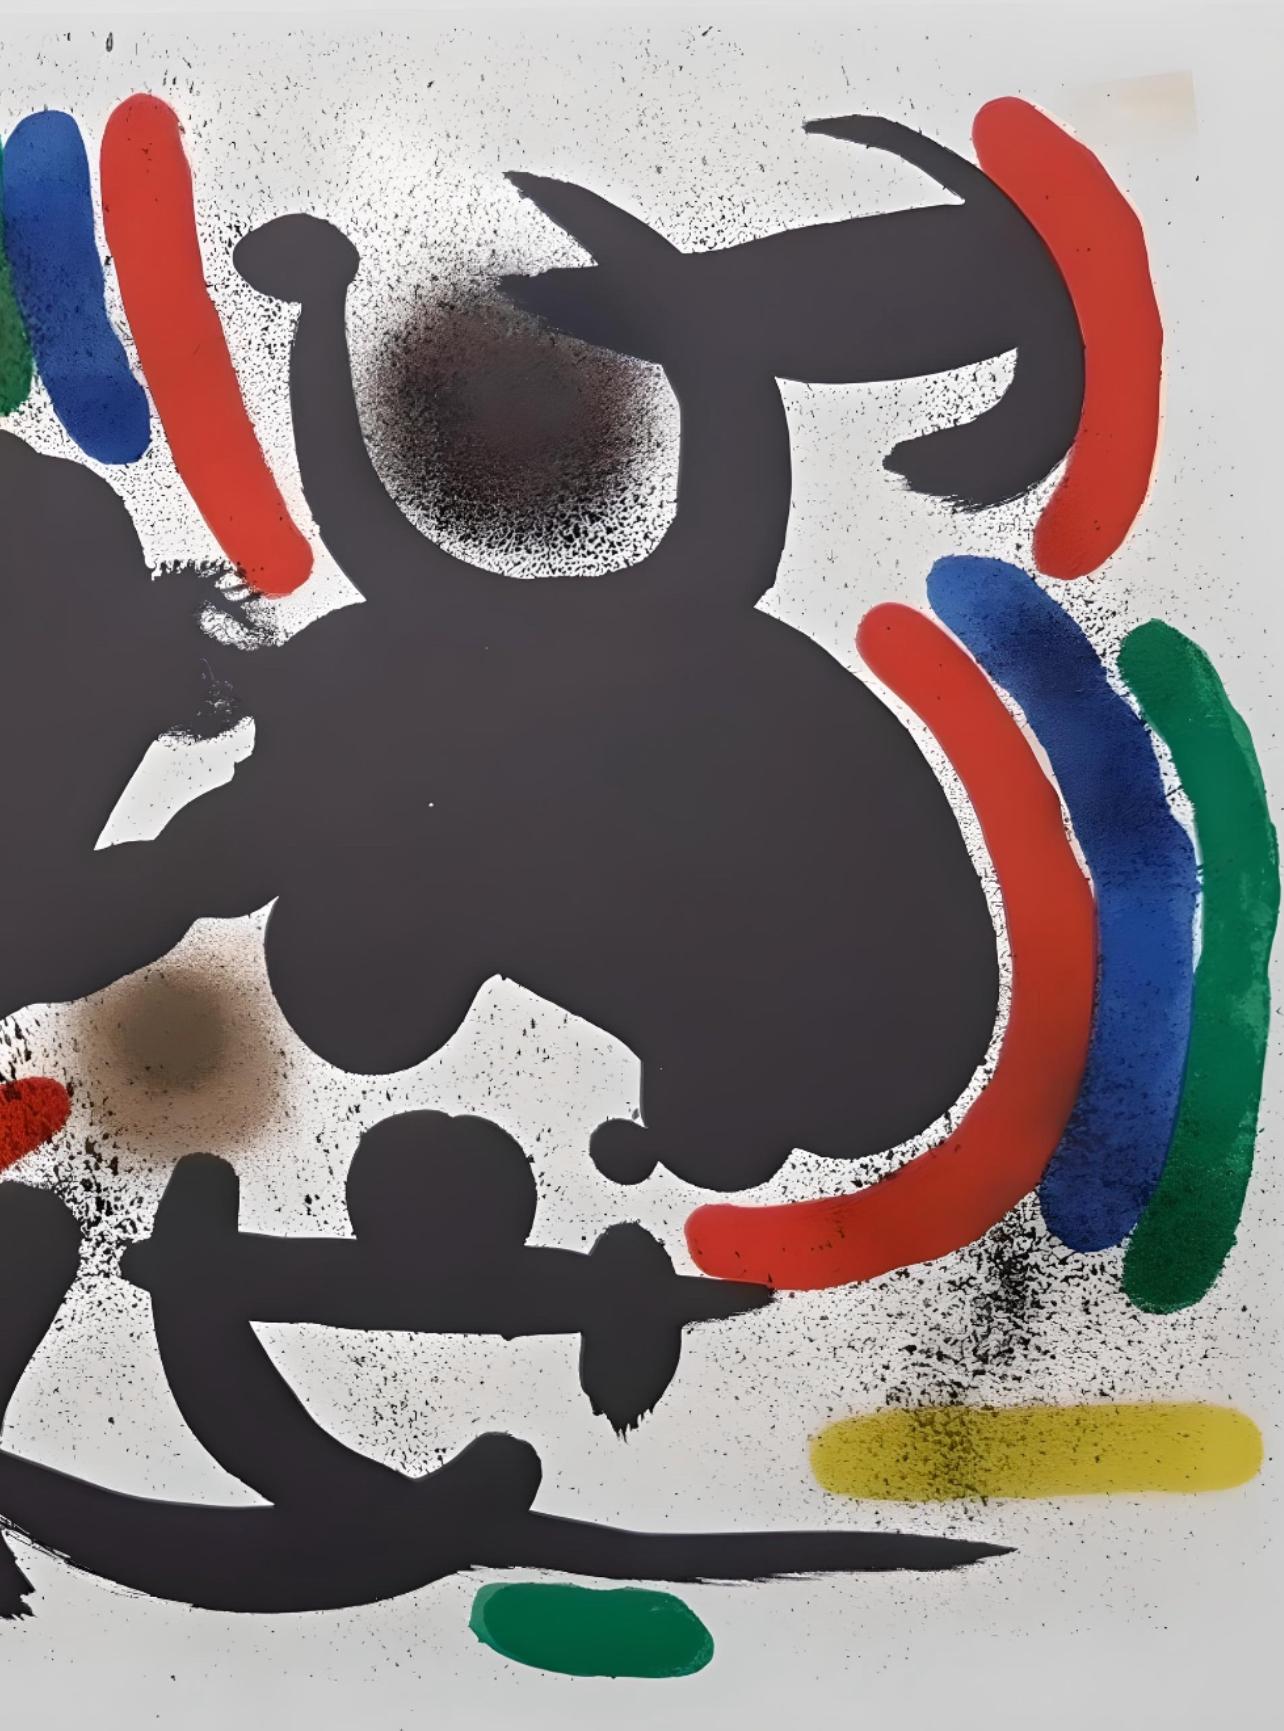 Original Limited Edition Lithograph on Vellum Paper. Edition: 5,000. Inscription: Unsigned and unnumbered, as issued. Excellent Condition with center fold, as issued by the publisher; never framed or matted. Notes: From, Joan Miró Lithographes,